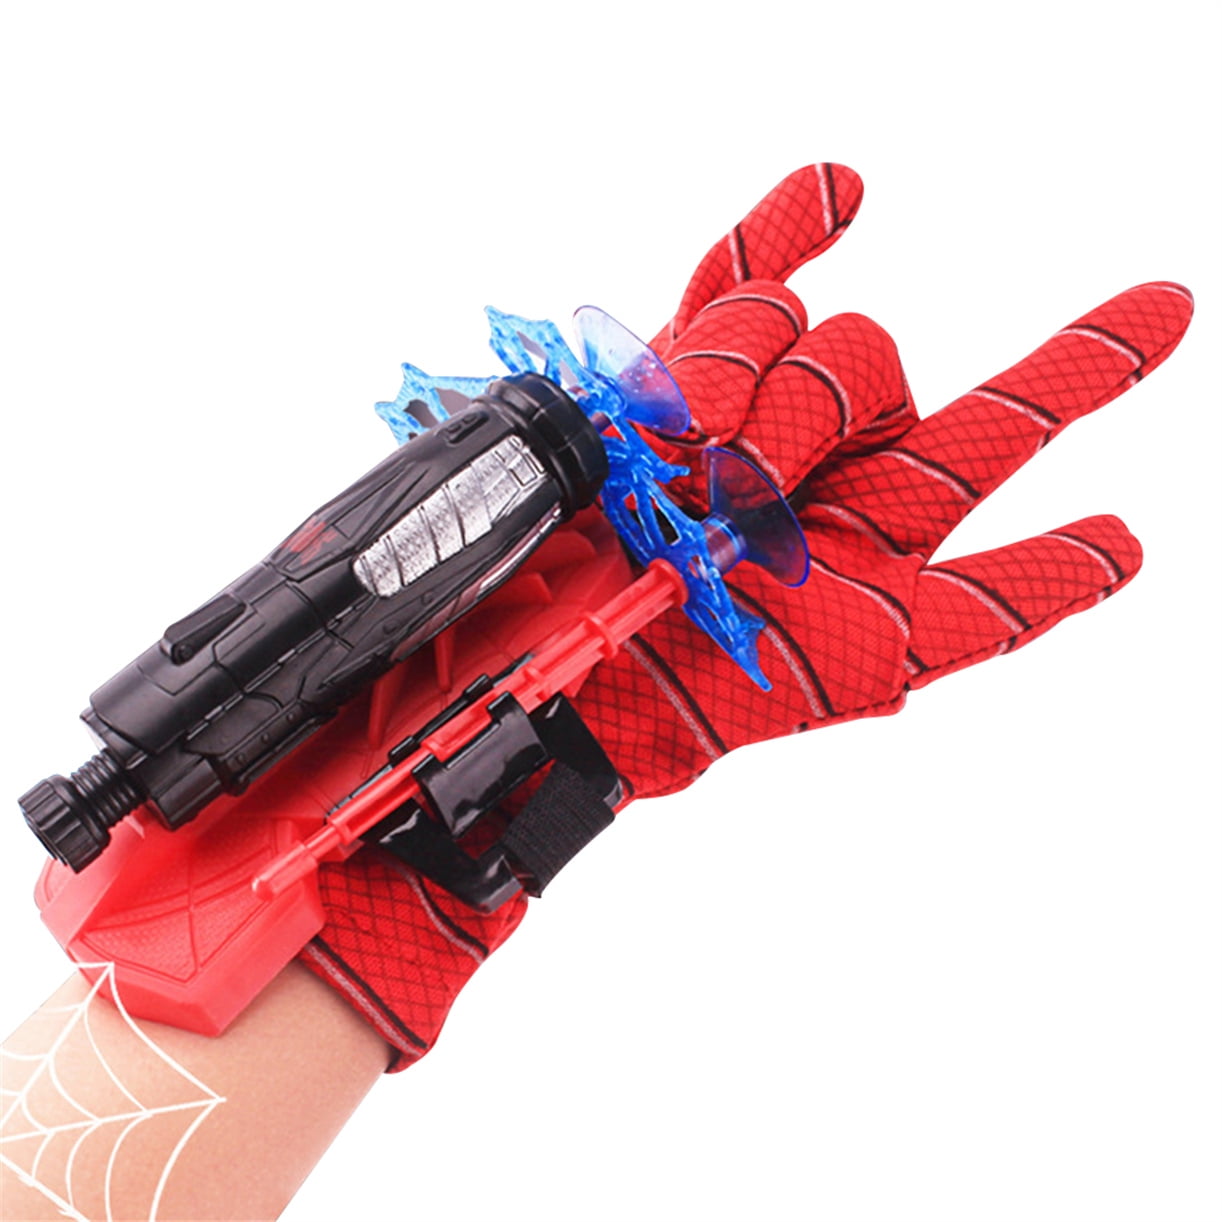 Spider Man Web Shooter Toy